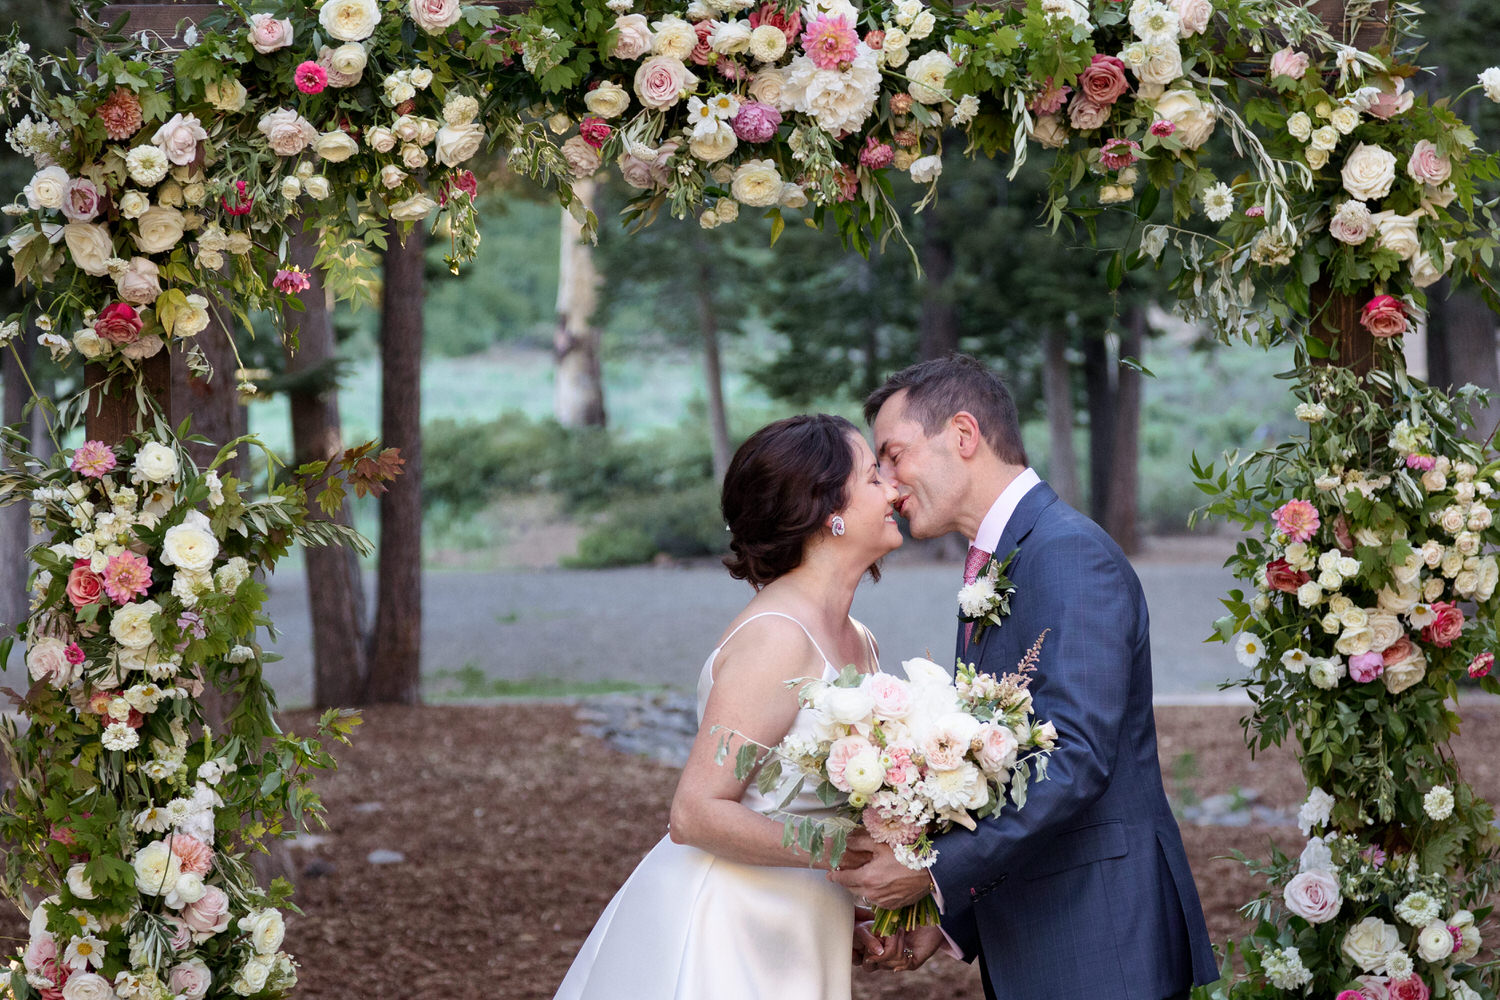 A couple who decided to get married at the Ritz Carlton Lake Tahoe share a kiss among pine trees and a floral arch.